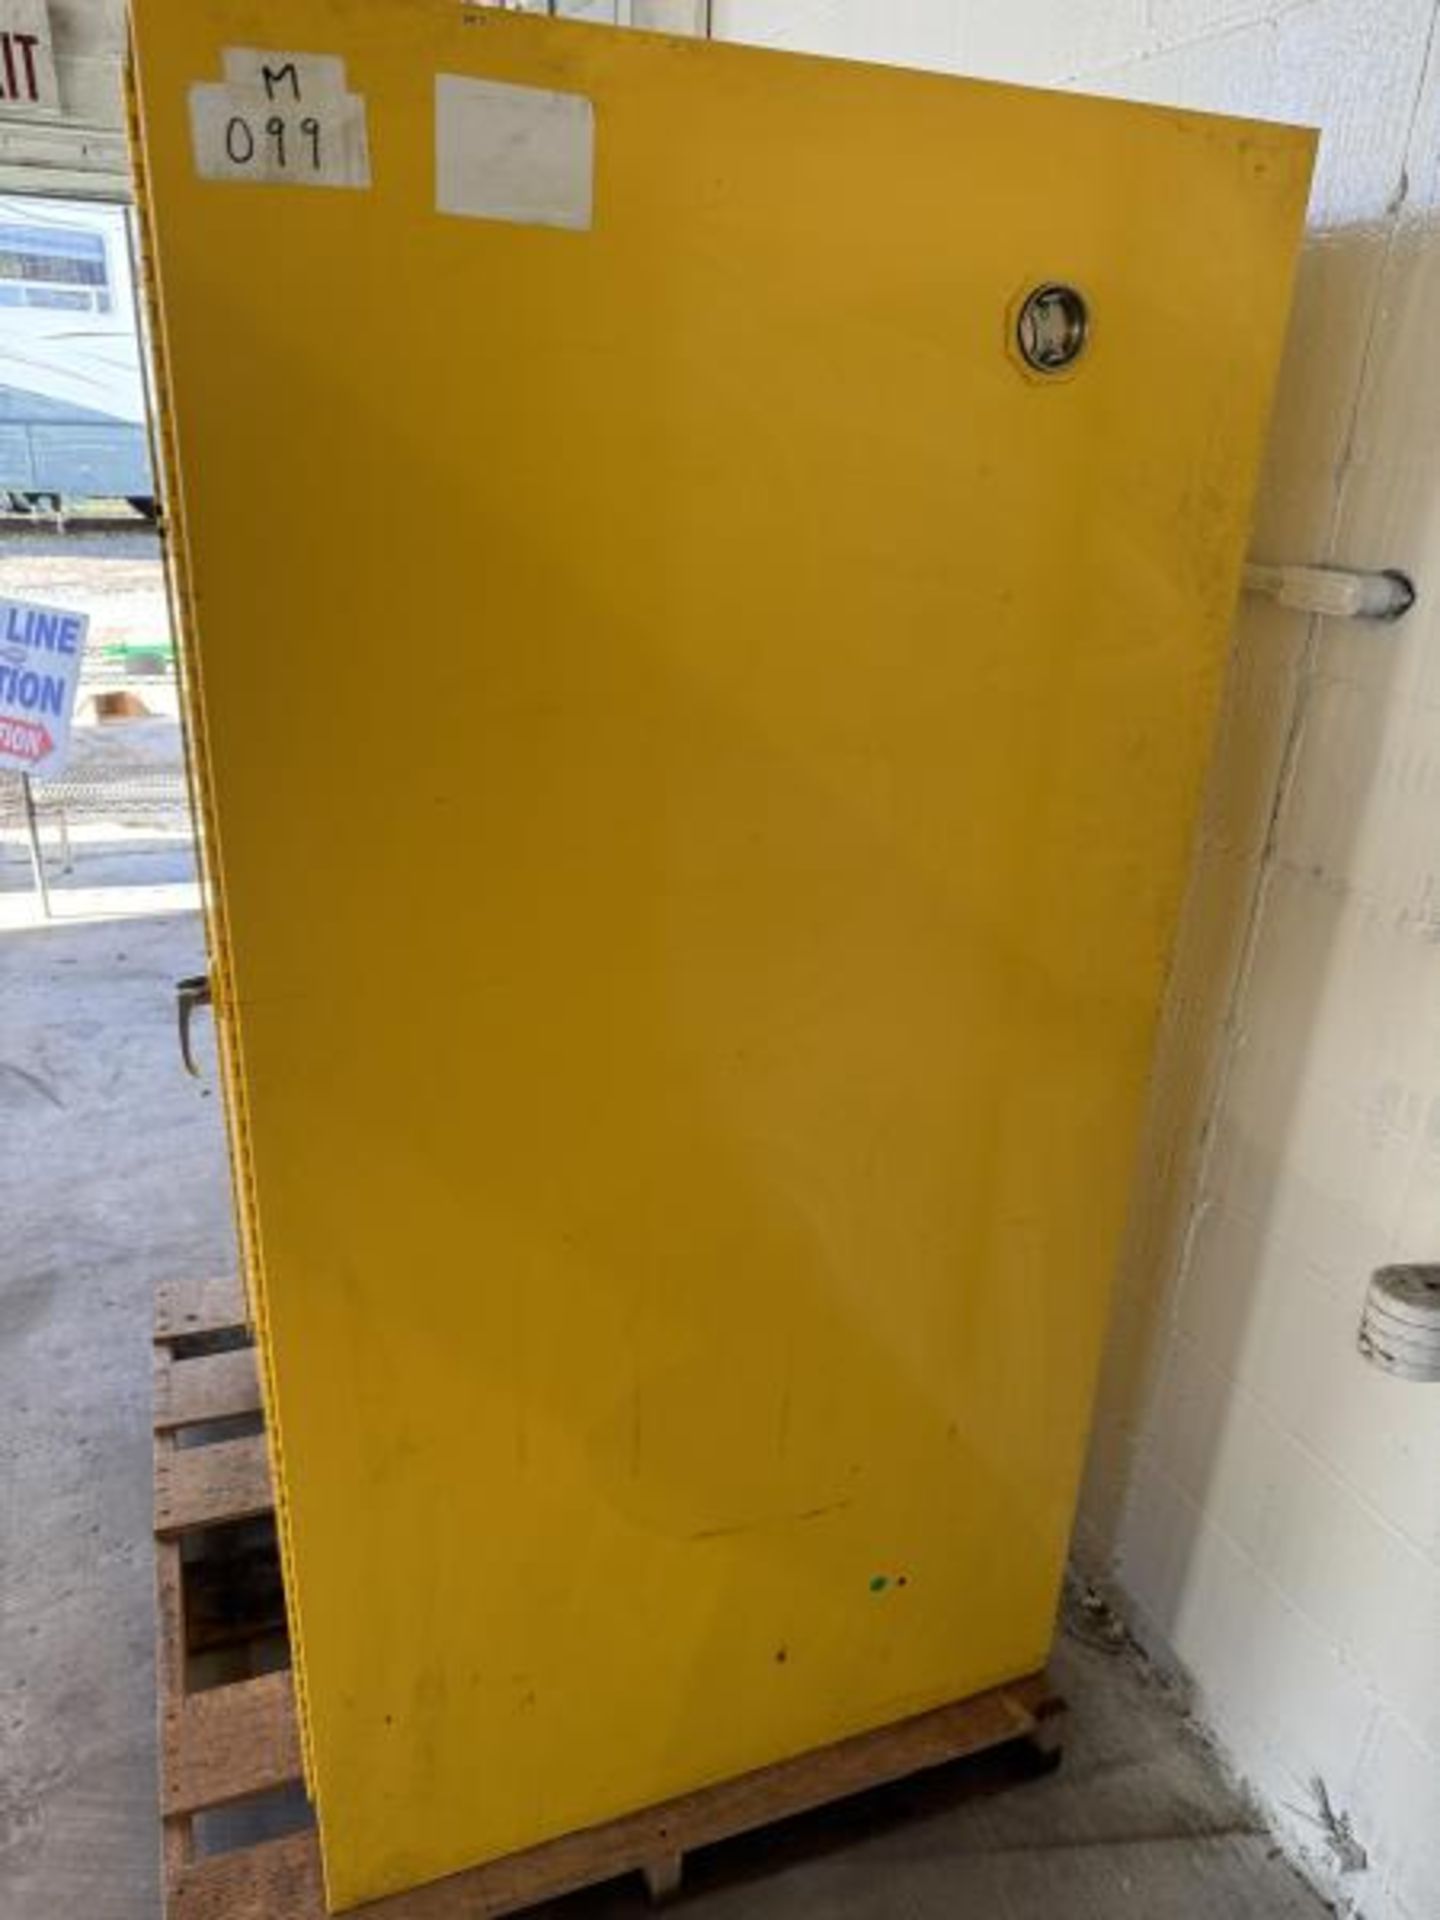 Justrite Flammable Liquid Storage Cabinet 34" Wide x 34" Deep x 66" Tall - Image 3 of 4